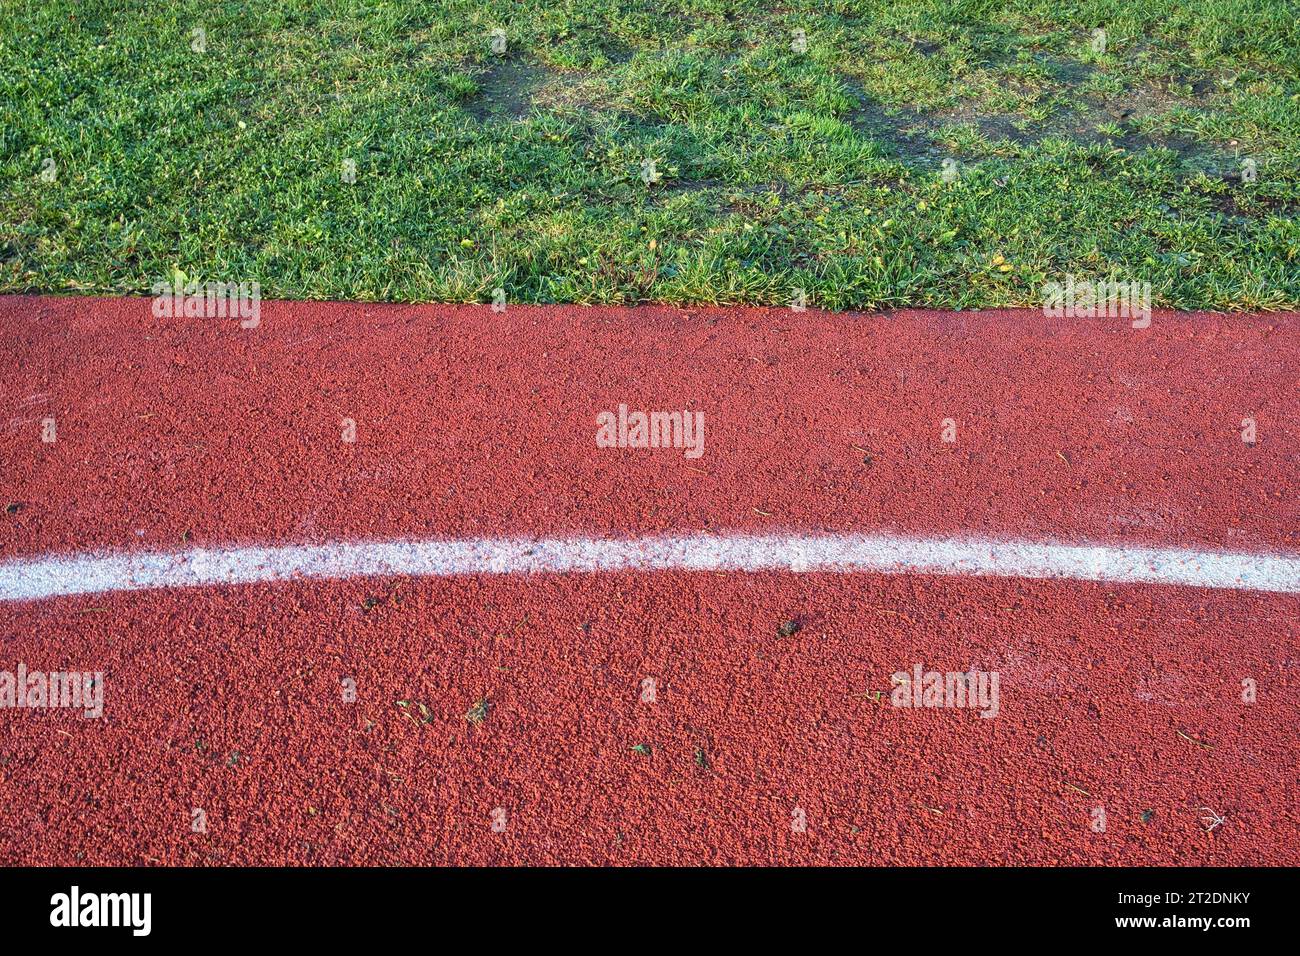 javelin throwing line marking on an athletics track outdoors Stock Photo